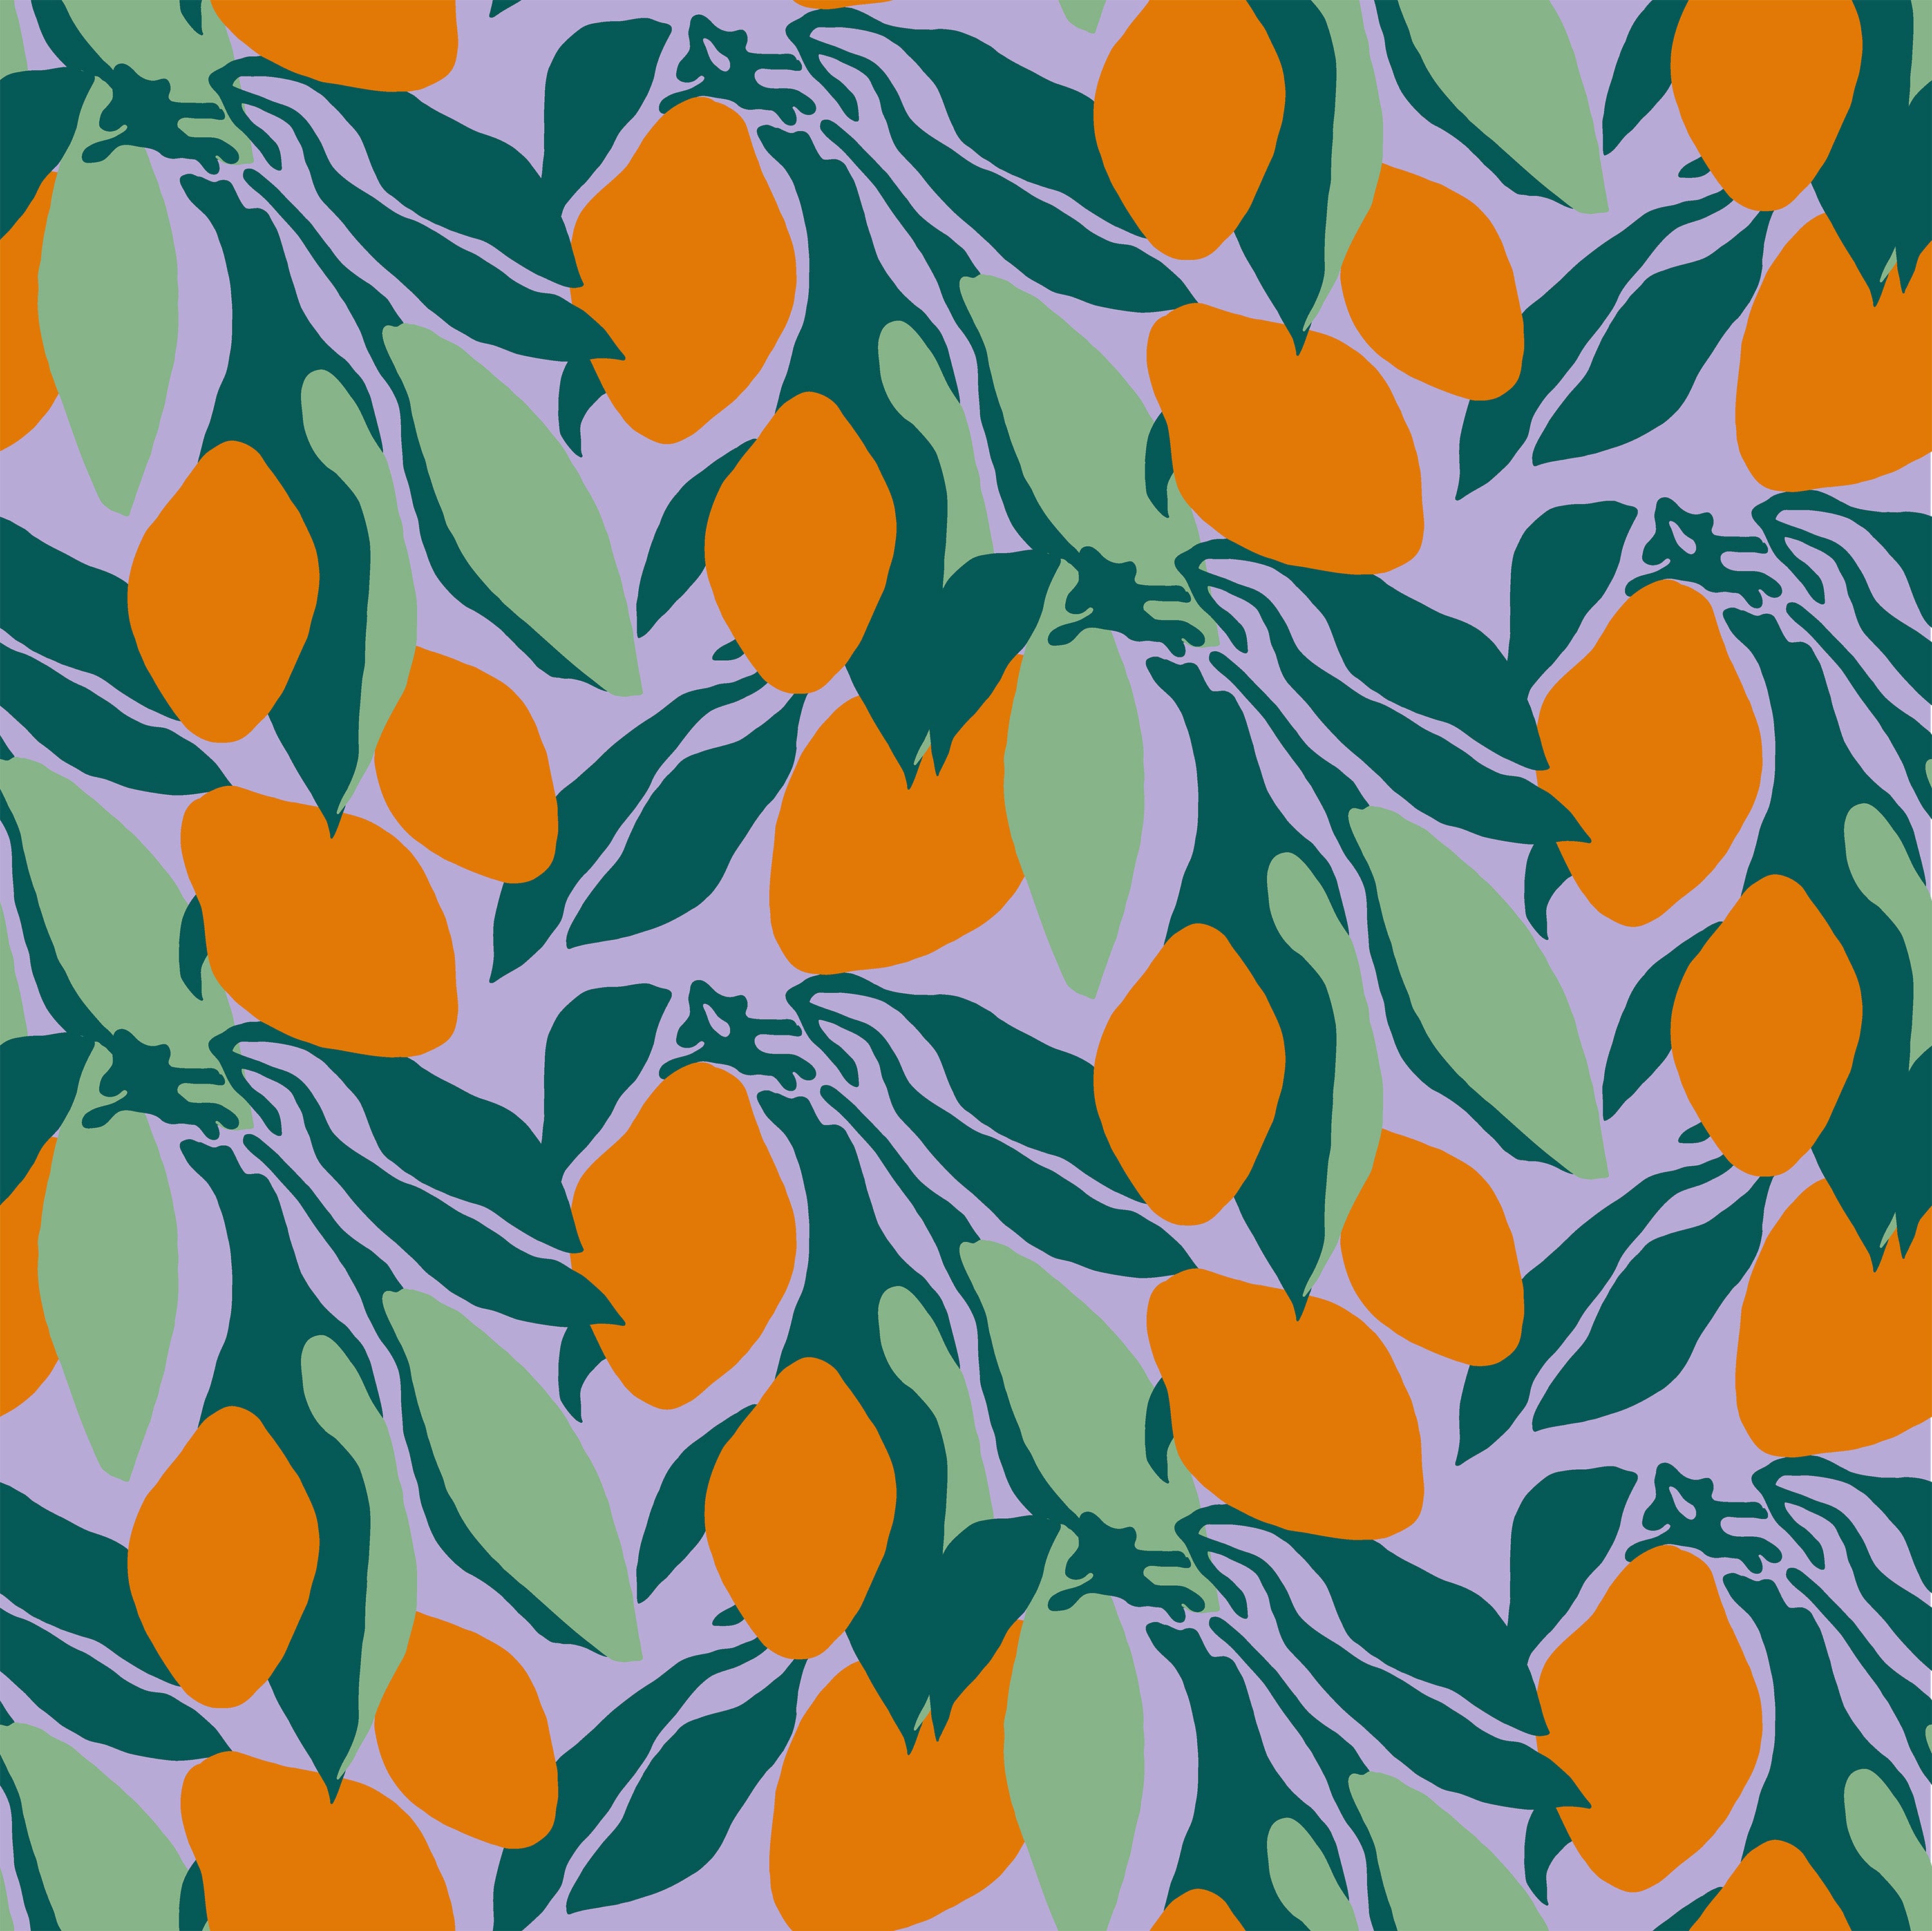 A seamless pattern featuring stylized orange fruits on branches with leaves, set against a purple background. The pattern shows bright orange fruit clusters and vibrant green leaves, offering a fresh, tropical aesthetic.